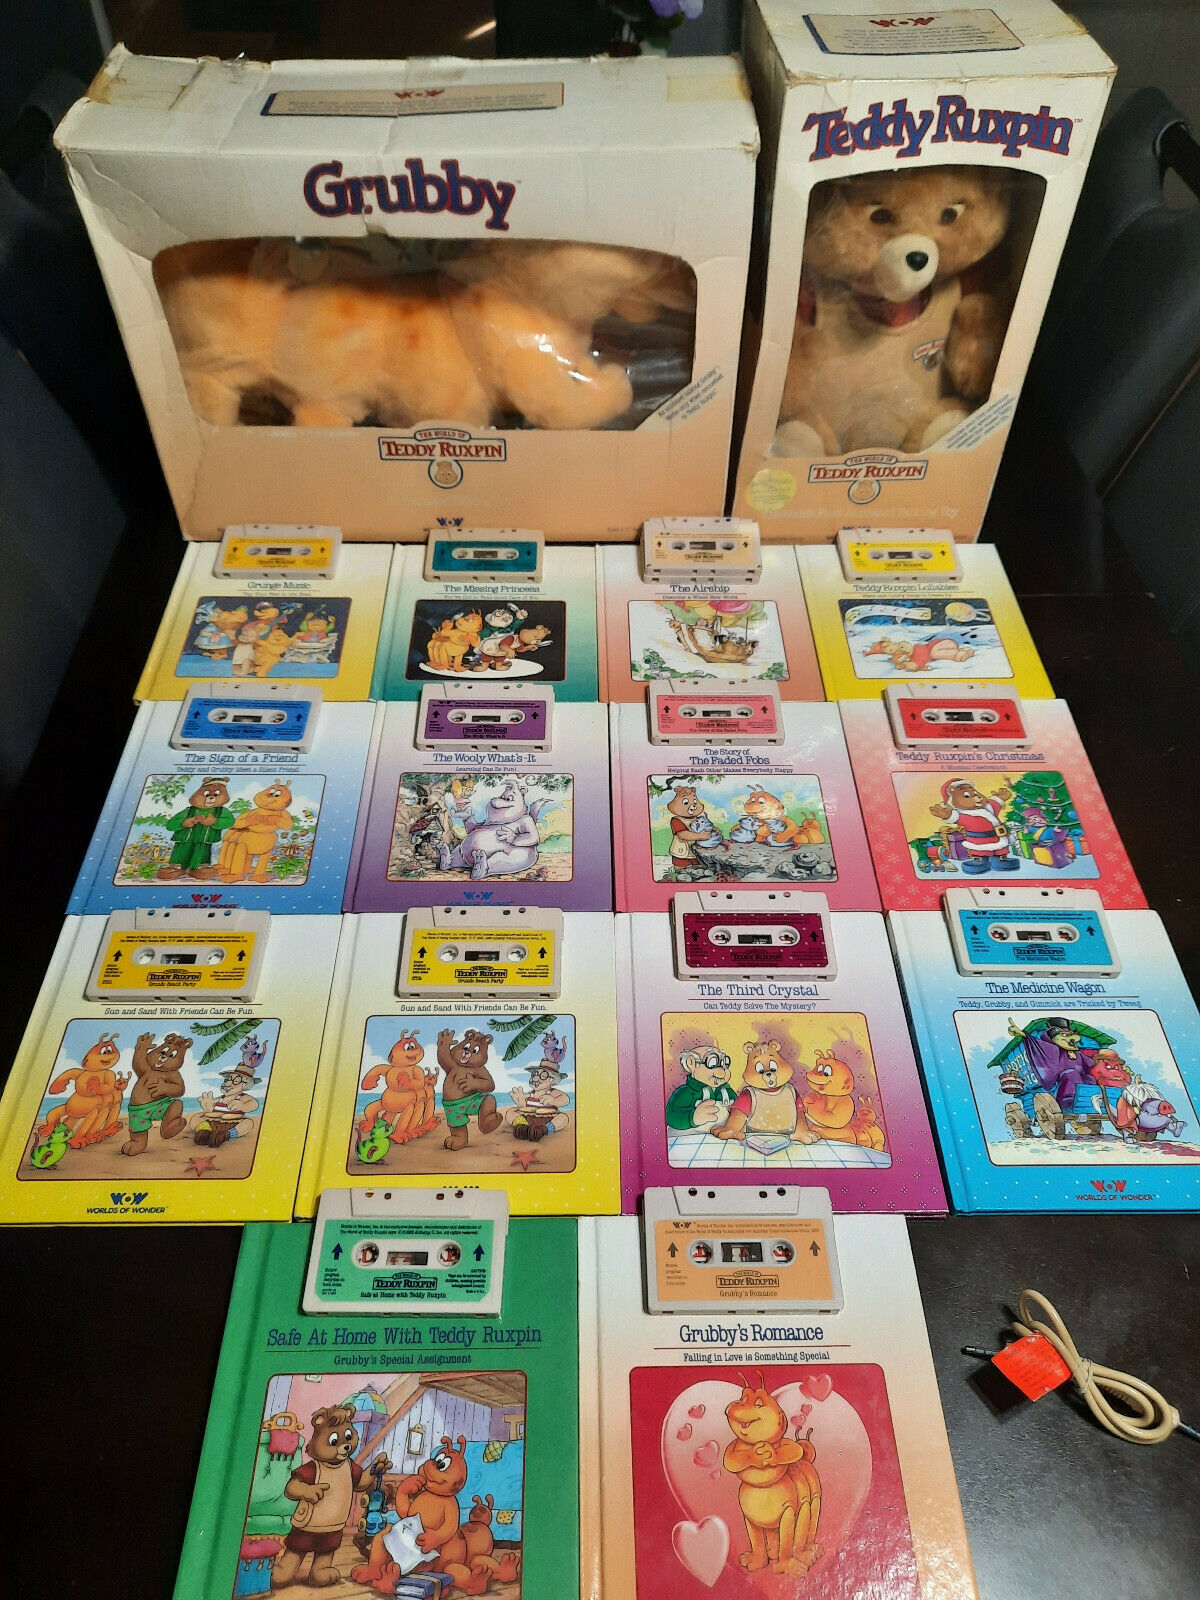 Teddy Ruxpin + Grubby + 13 Books With Tapes To Each + Connection Cord.